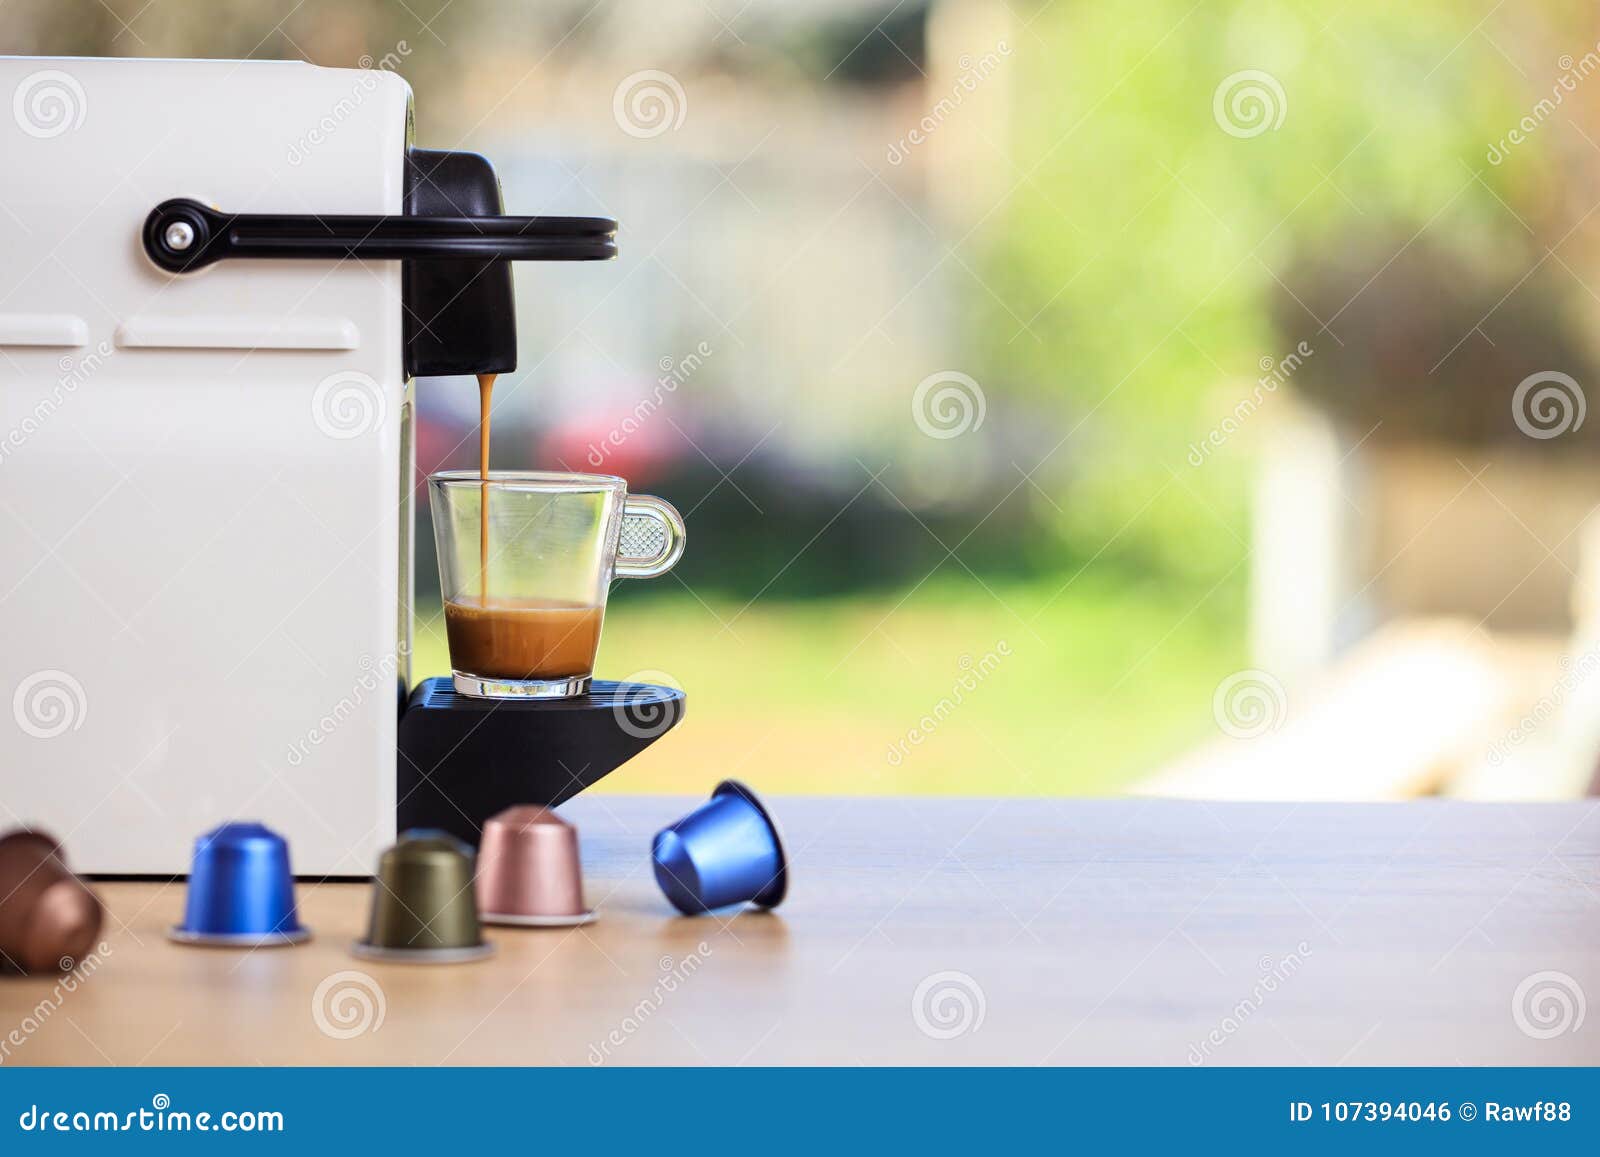 Espresso Coffee Machine On A Wooden Table Blur Background Space